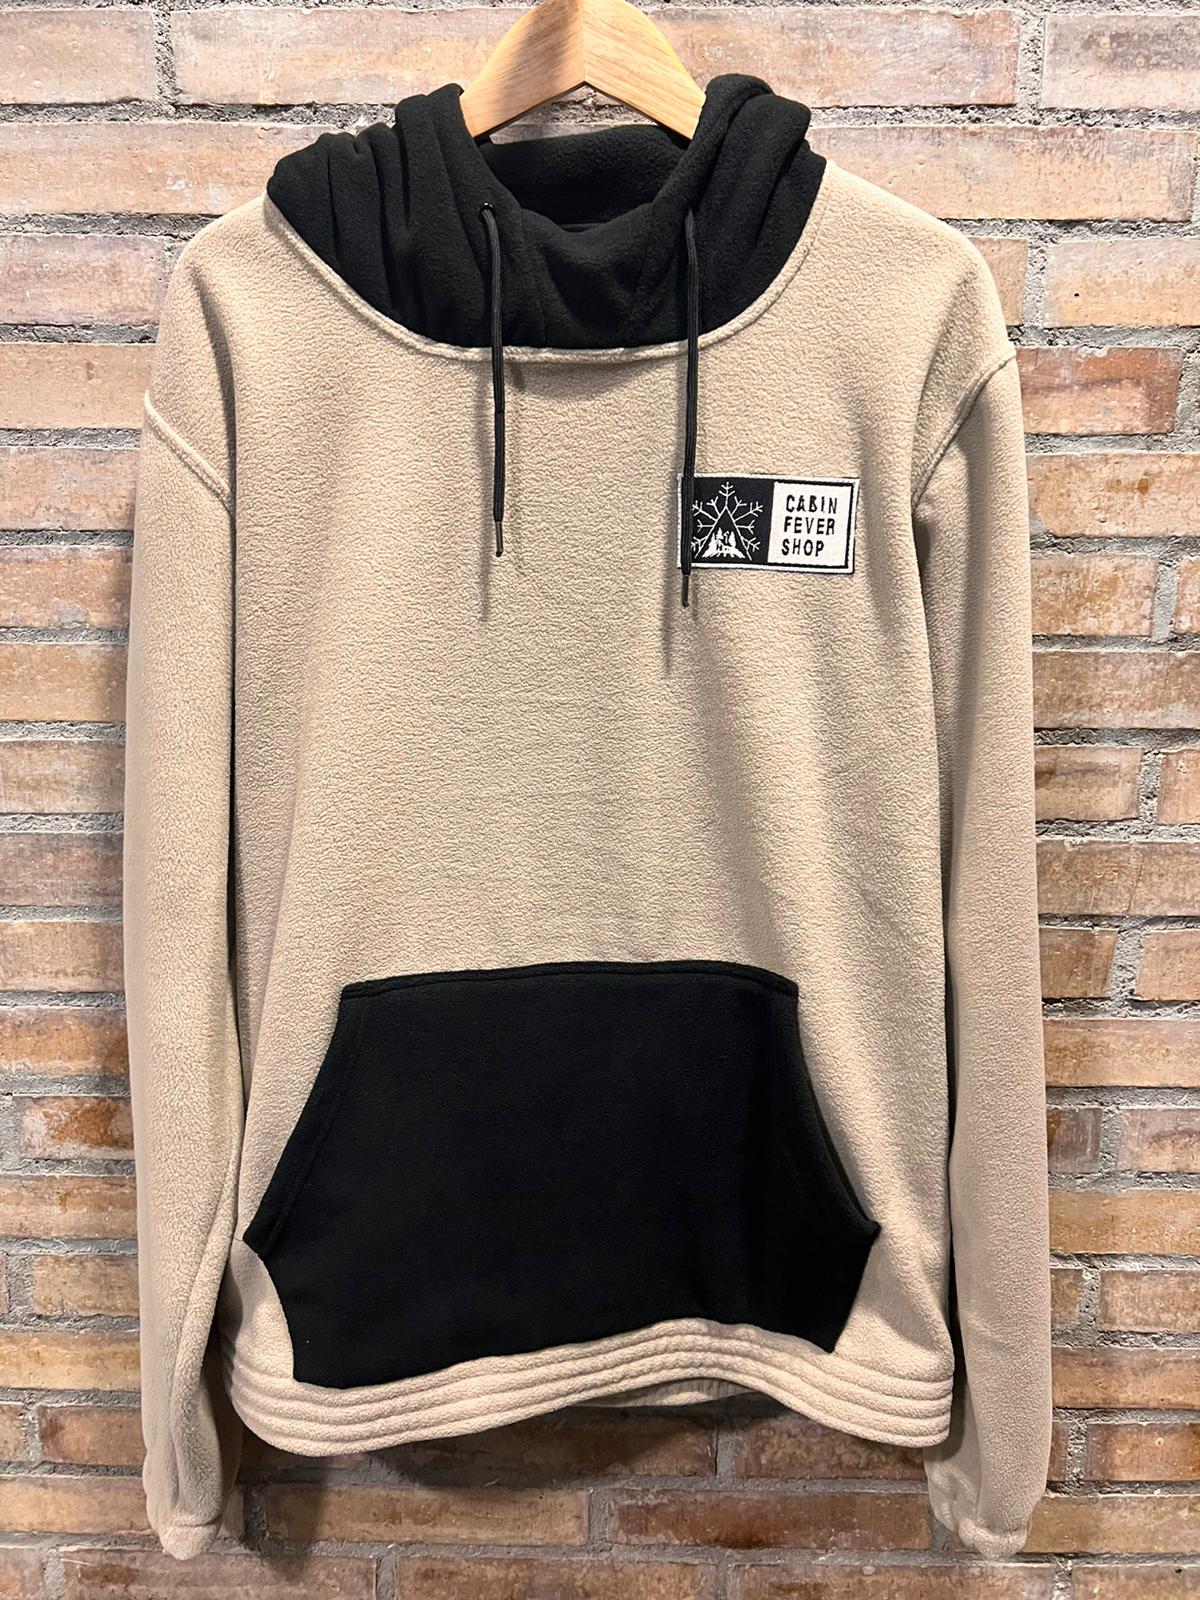 CABIN FEVER X LFM Small Logo Tech Pullover SAND AND BLACK  -1